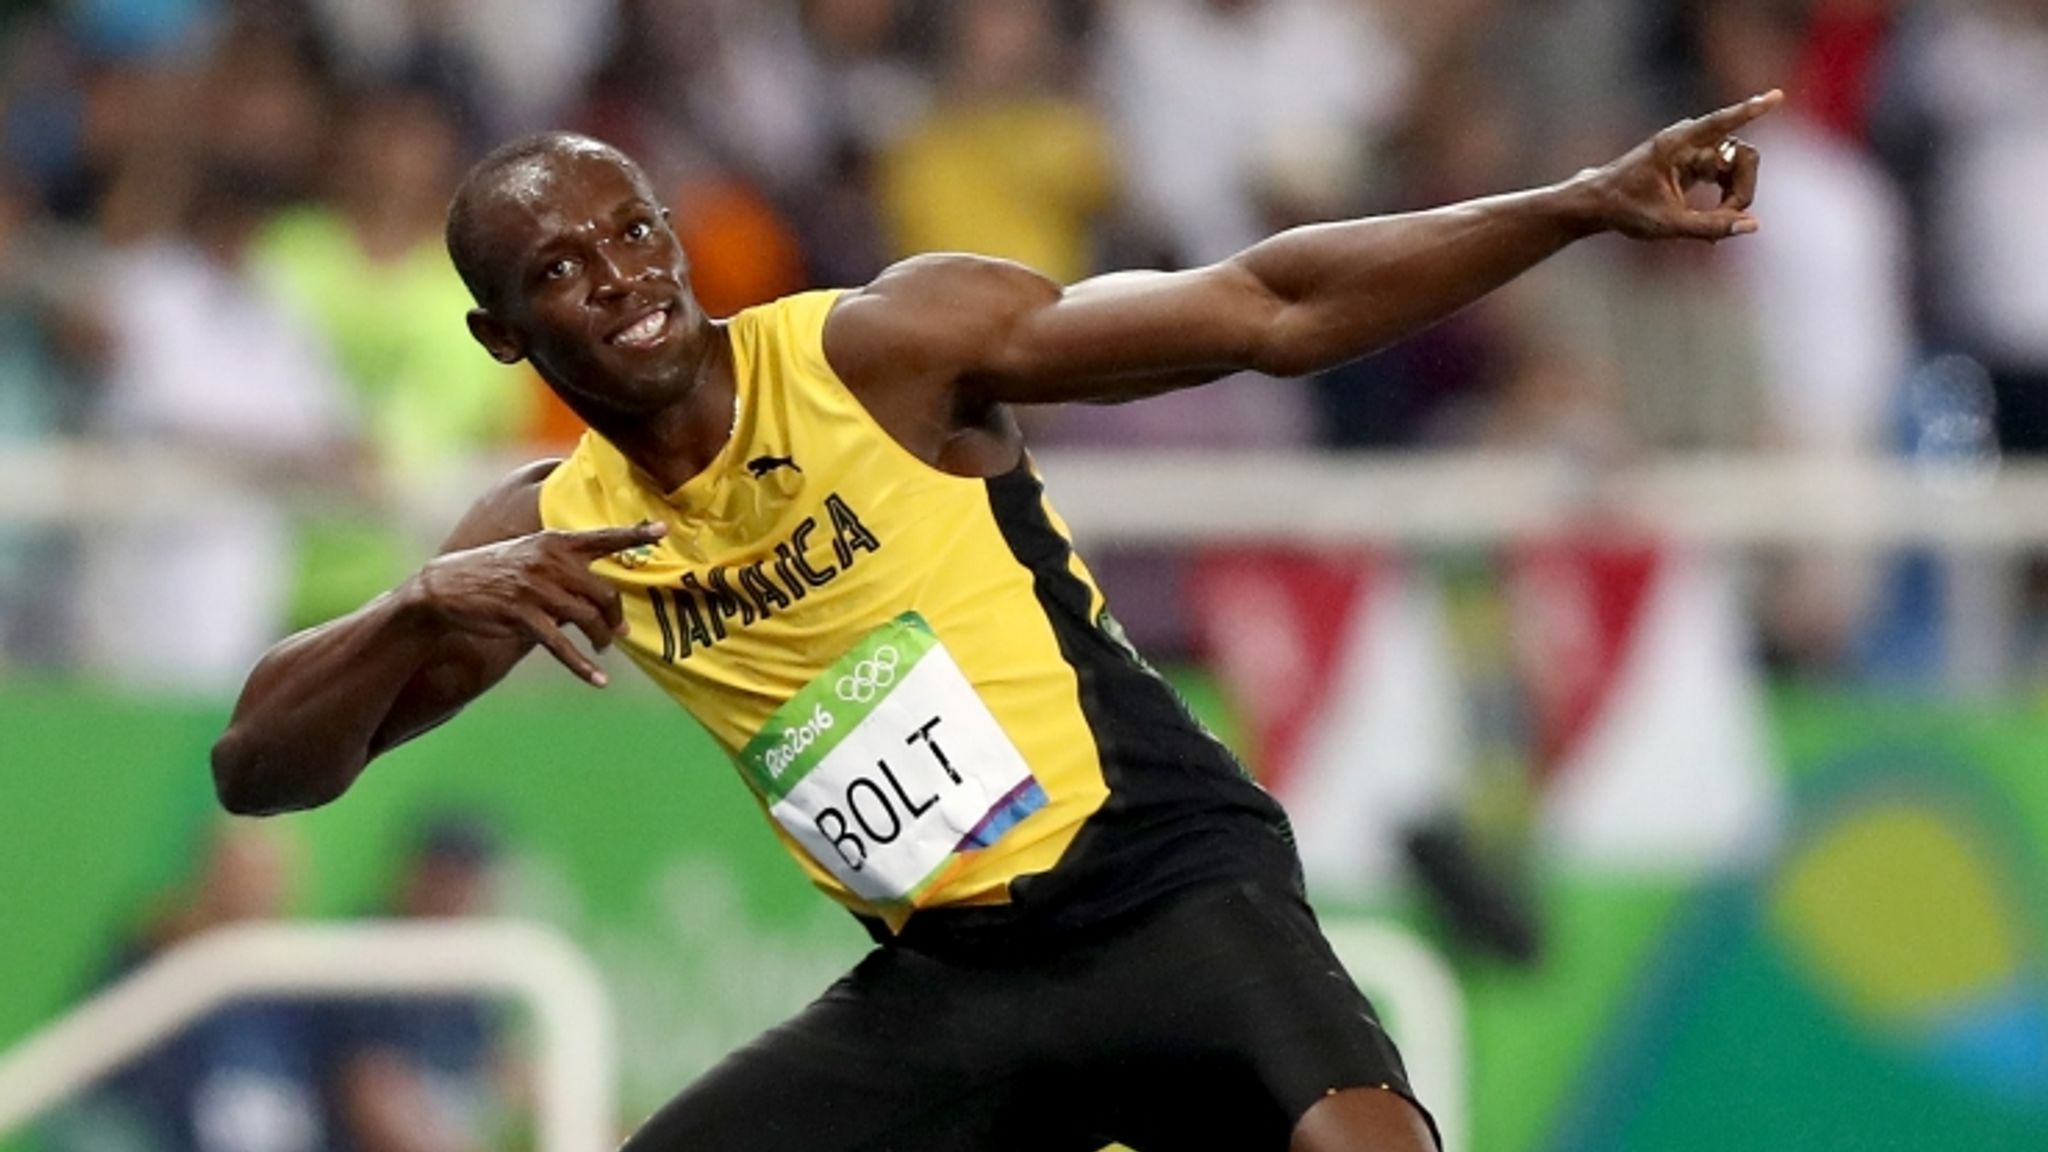 Usain Bolt's celebration pose and other unusual trademarks - BBC Newsround